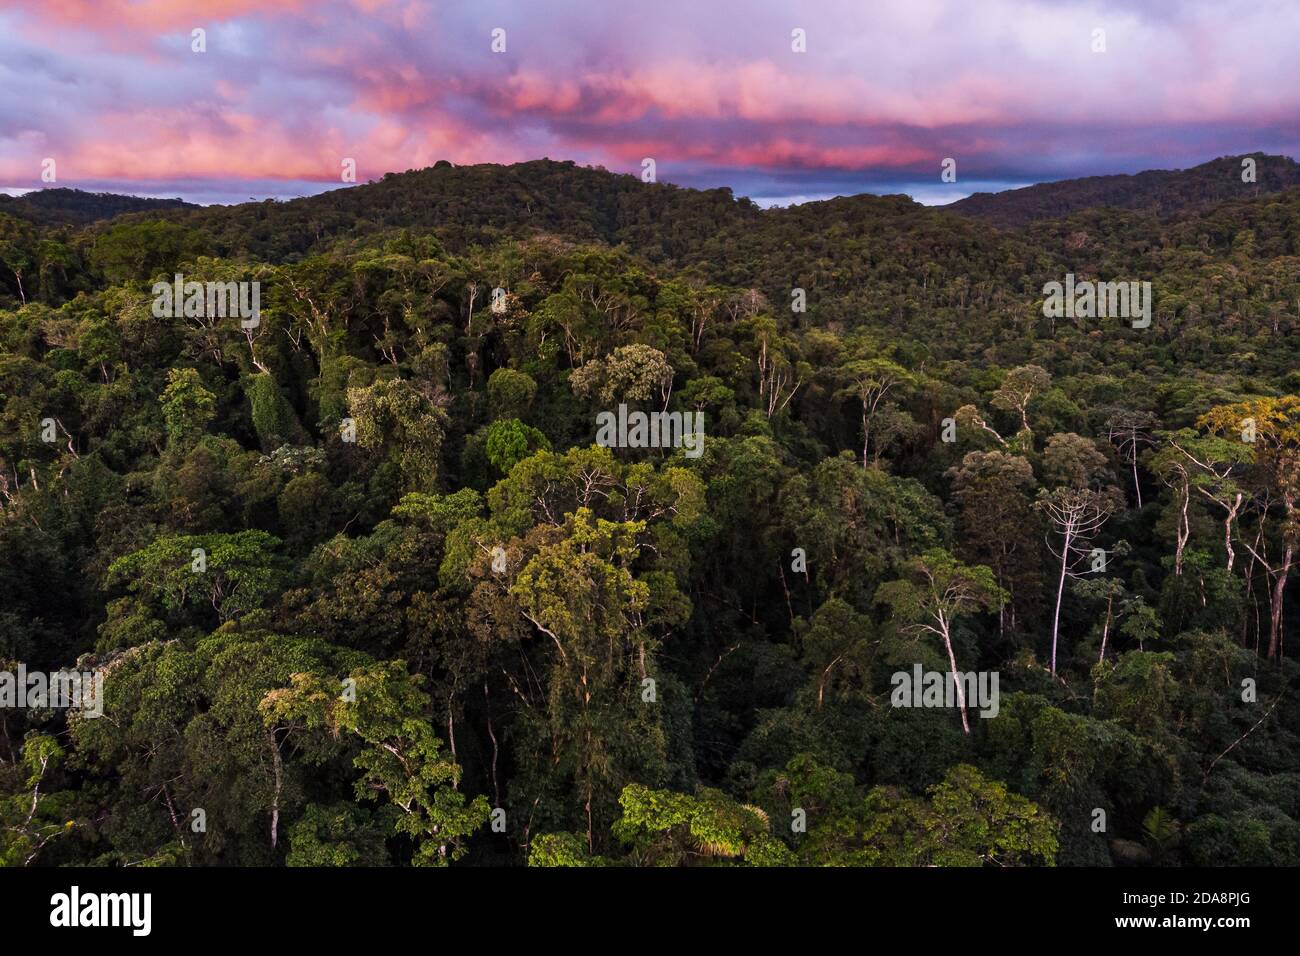 The Atlantic Rainforest of southern São Paulo State seen from above Stock Photo